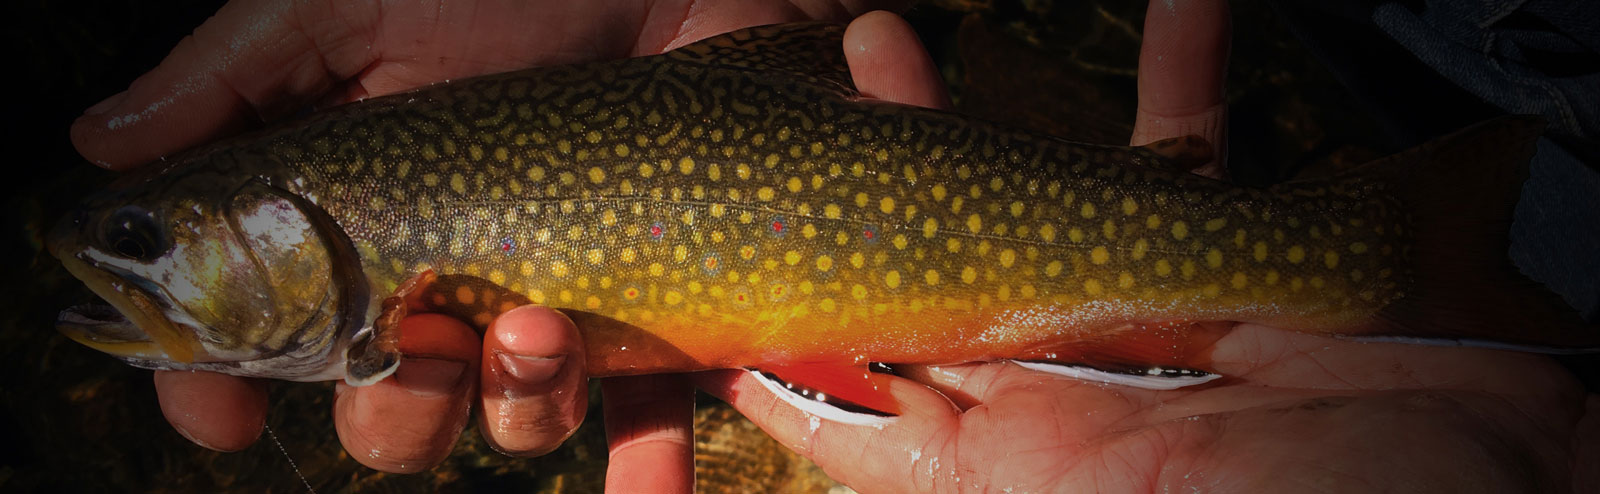 High Sierra Fishing Tactics  The Trout Report - Fishing Articles